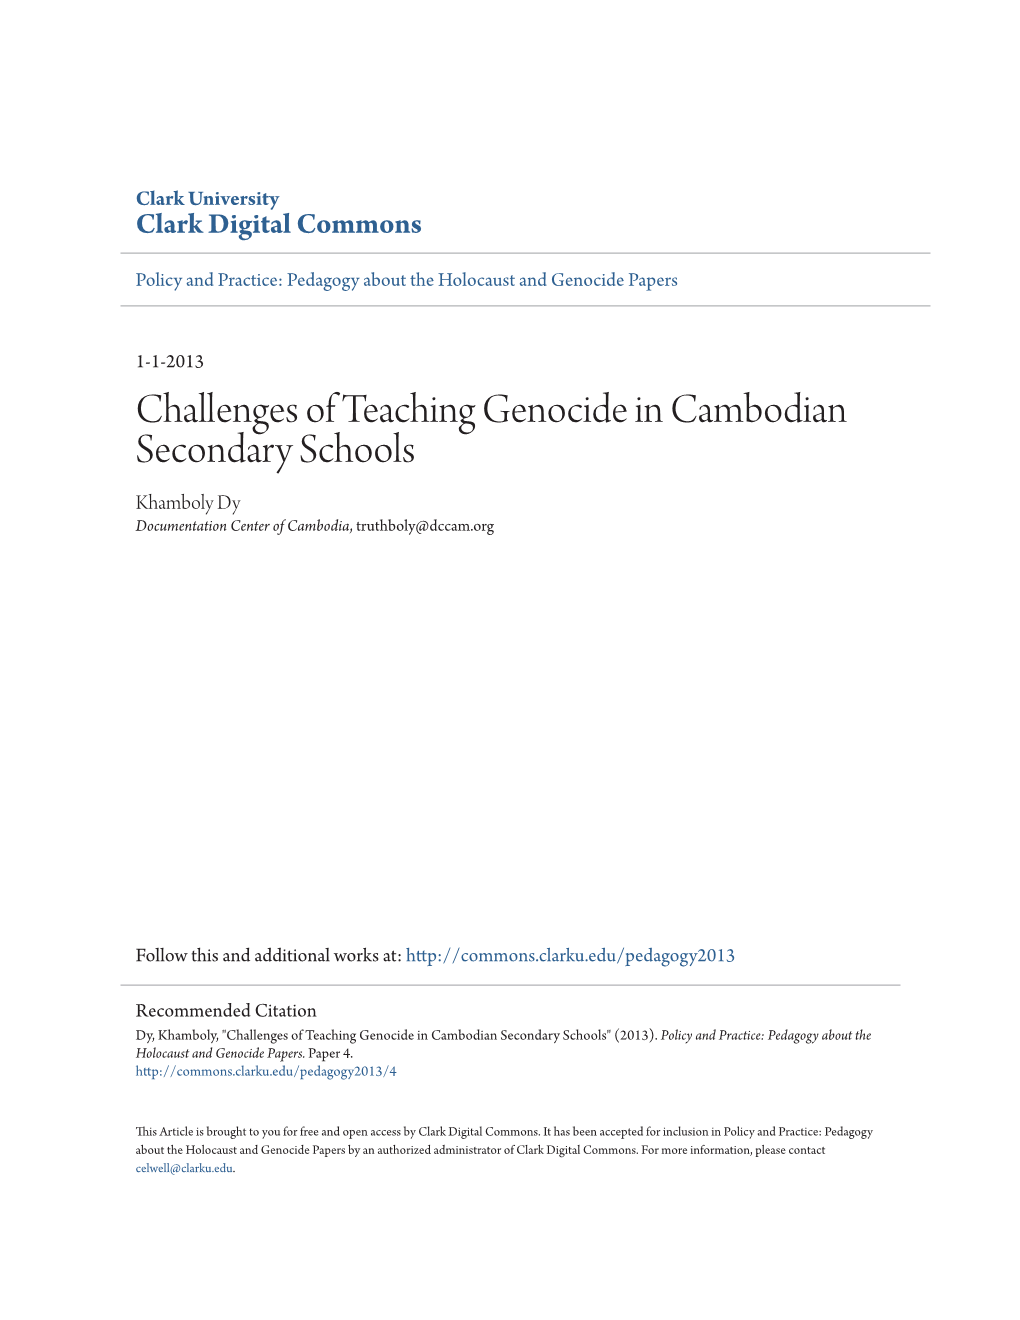 Challenges of Teaching Genocide in Cambodian Secondary Schools